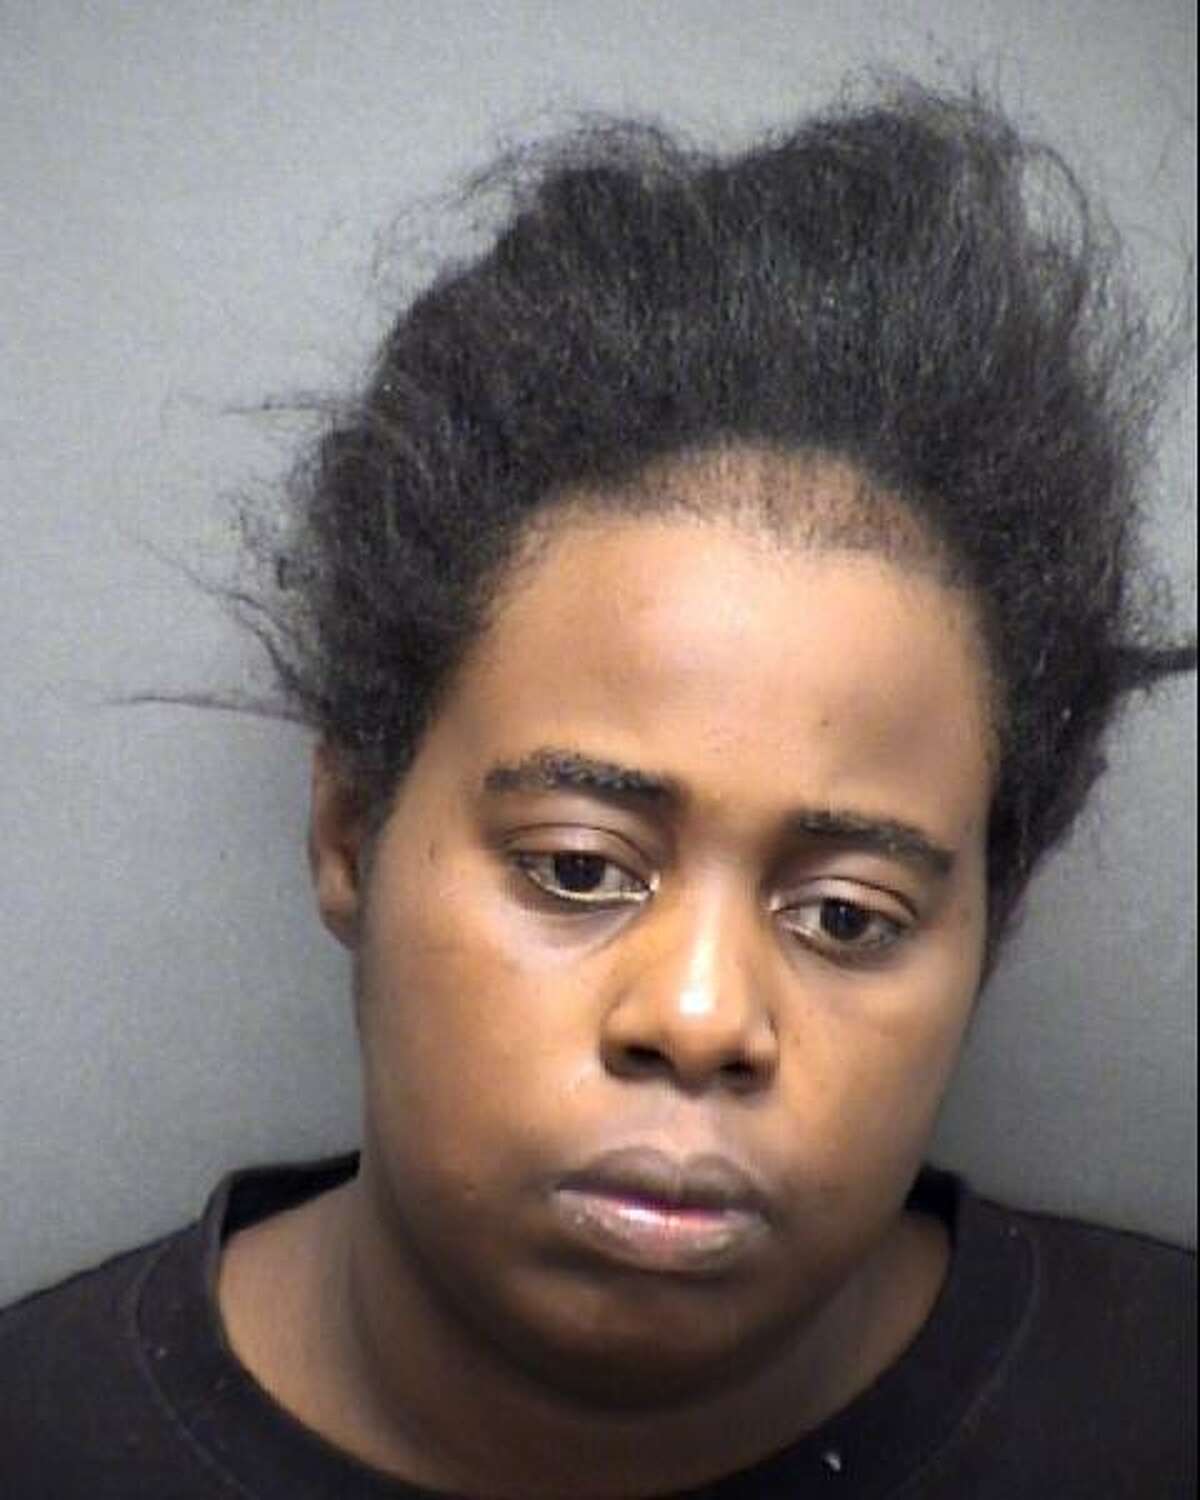 Lakendra Monique Williams, 31, is charged with assault with serious bodily injury of three children 14 years old or younger.